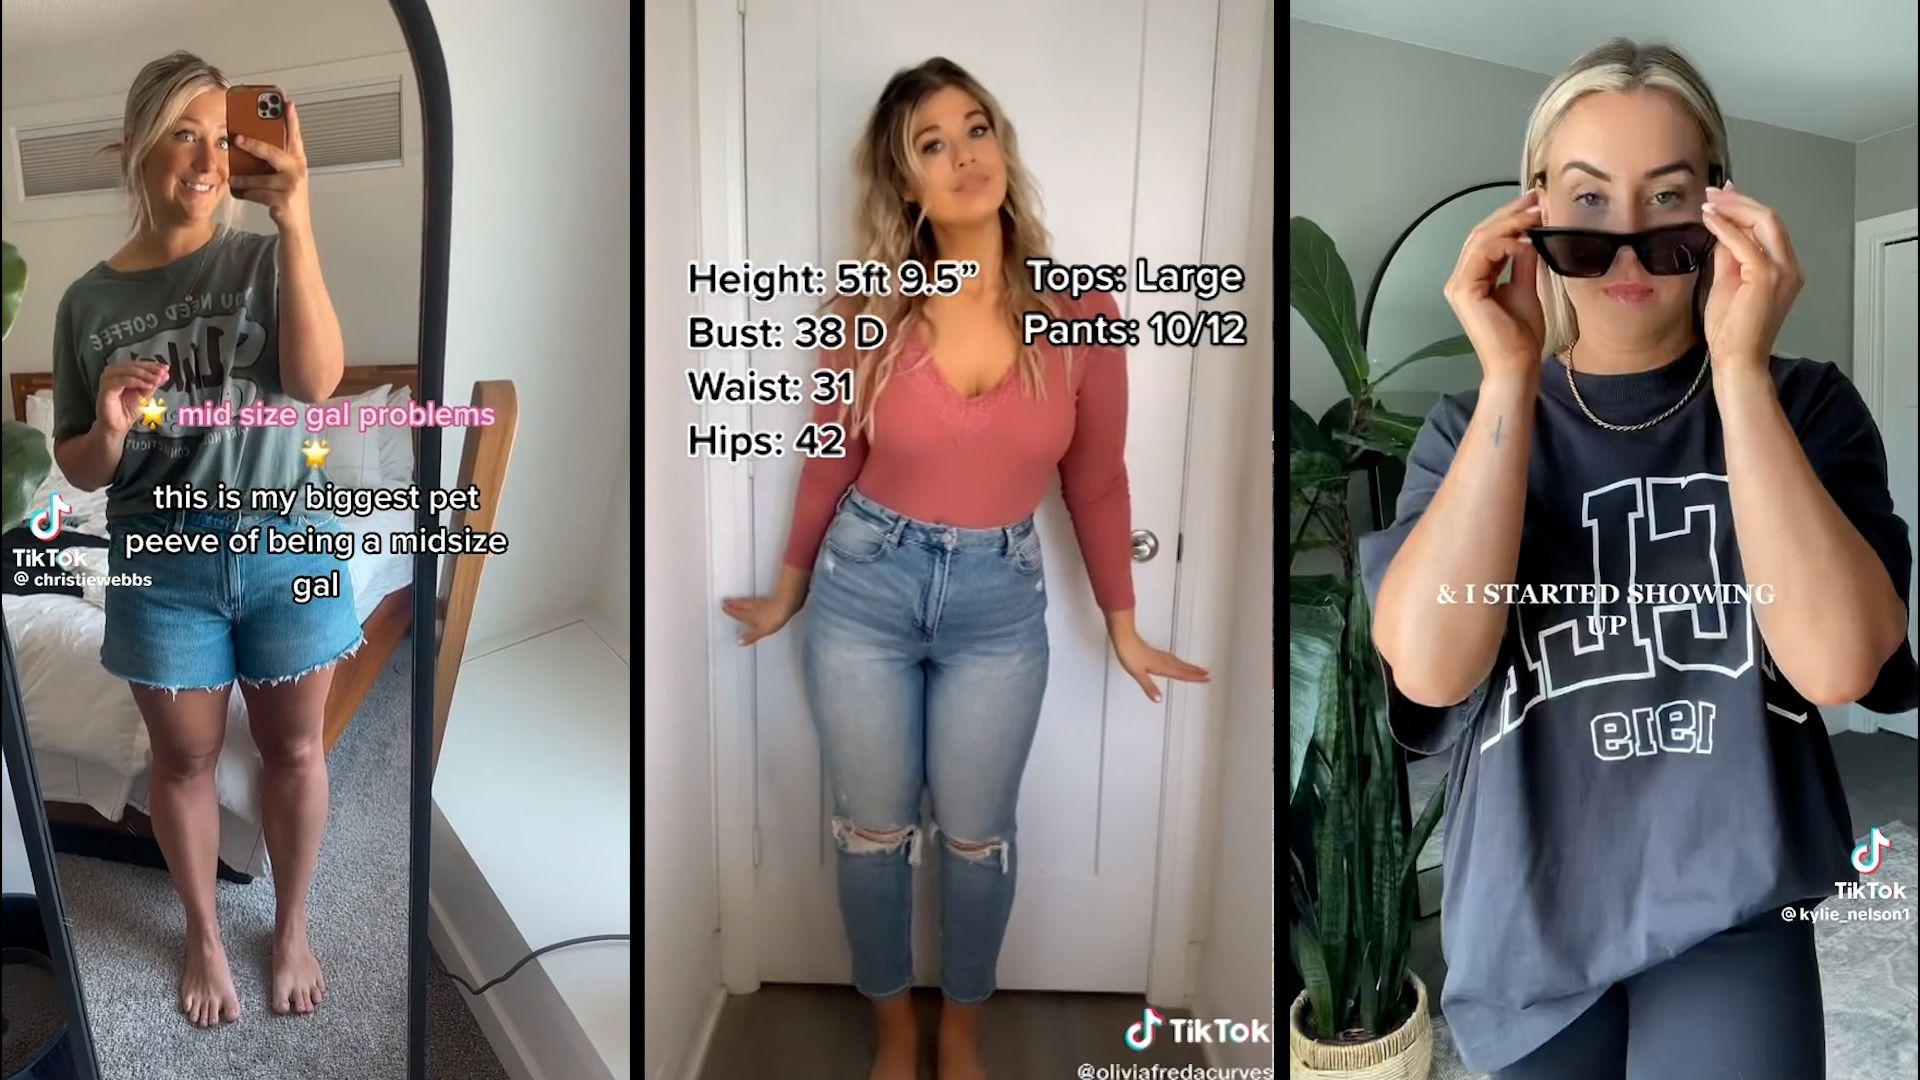 How mid-size fashion bloggers help my body image issues - Hannah